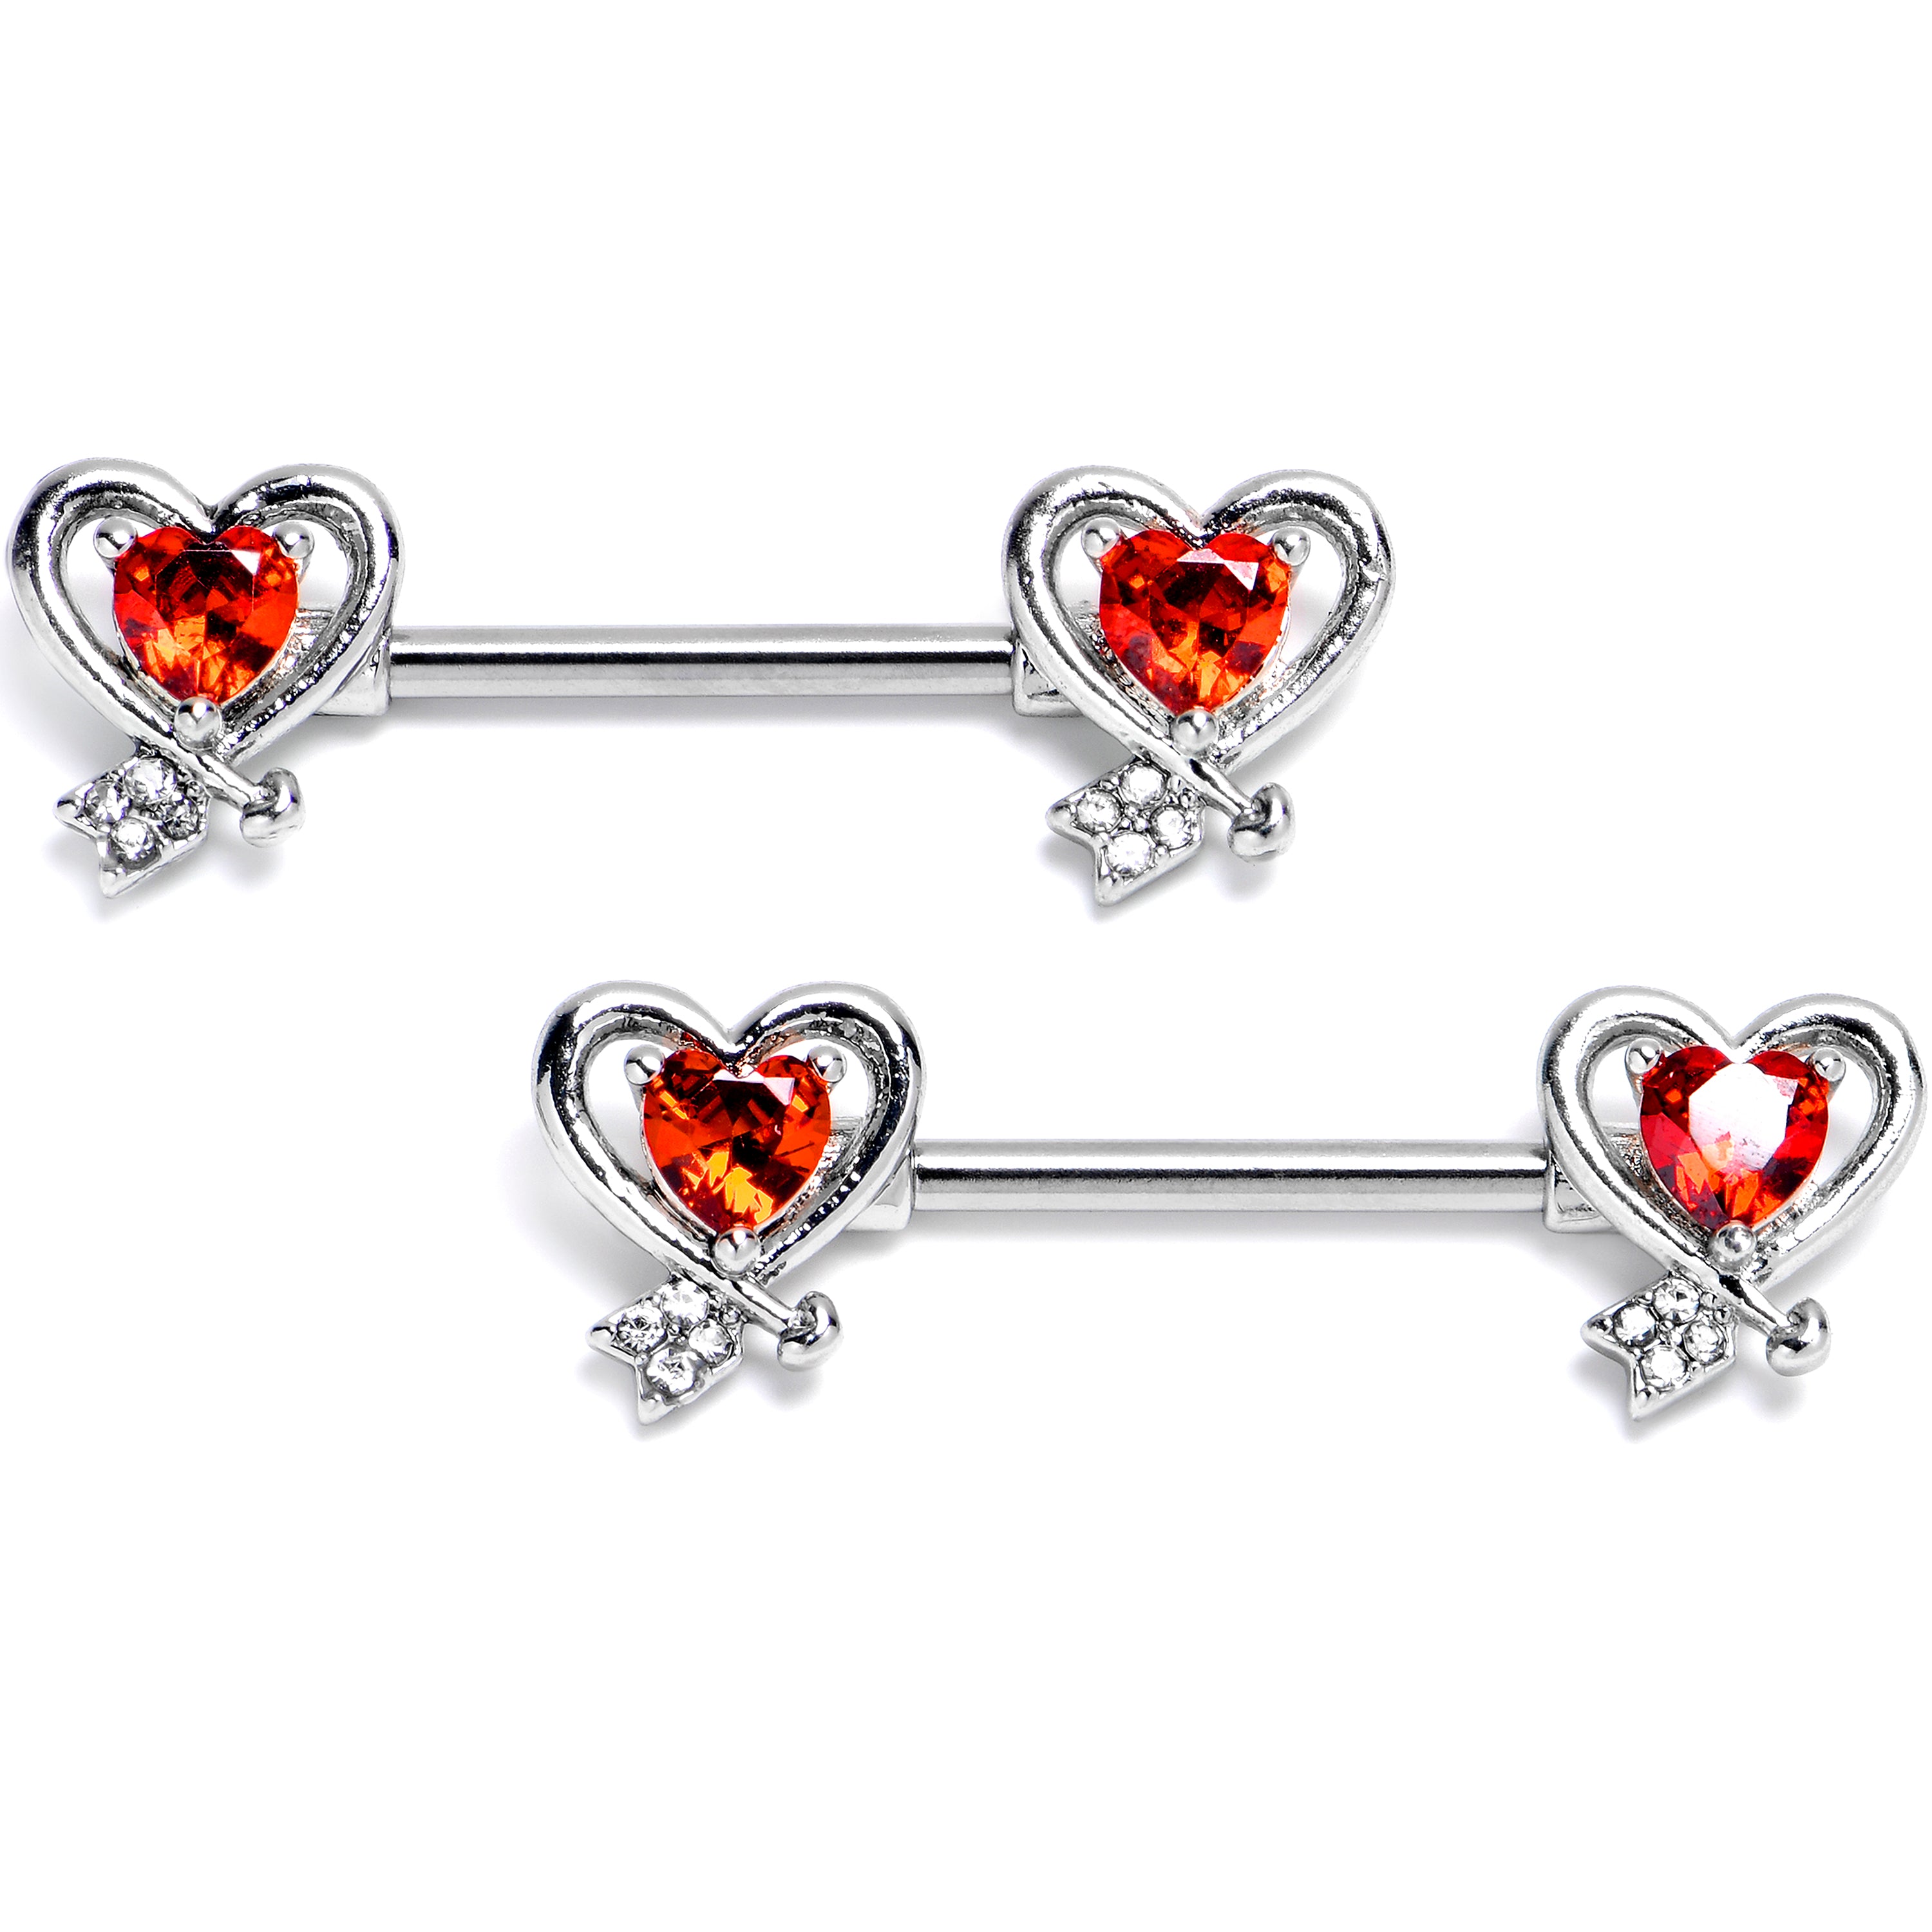 14 Gauge 9/16 Red CZ Gem Wrapped In Heart Barbell Nipple Ring Set